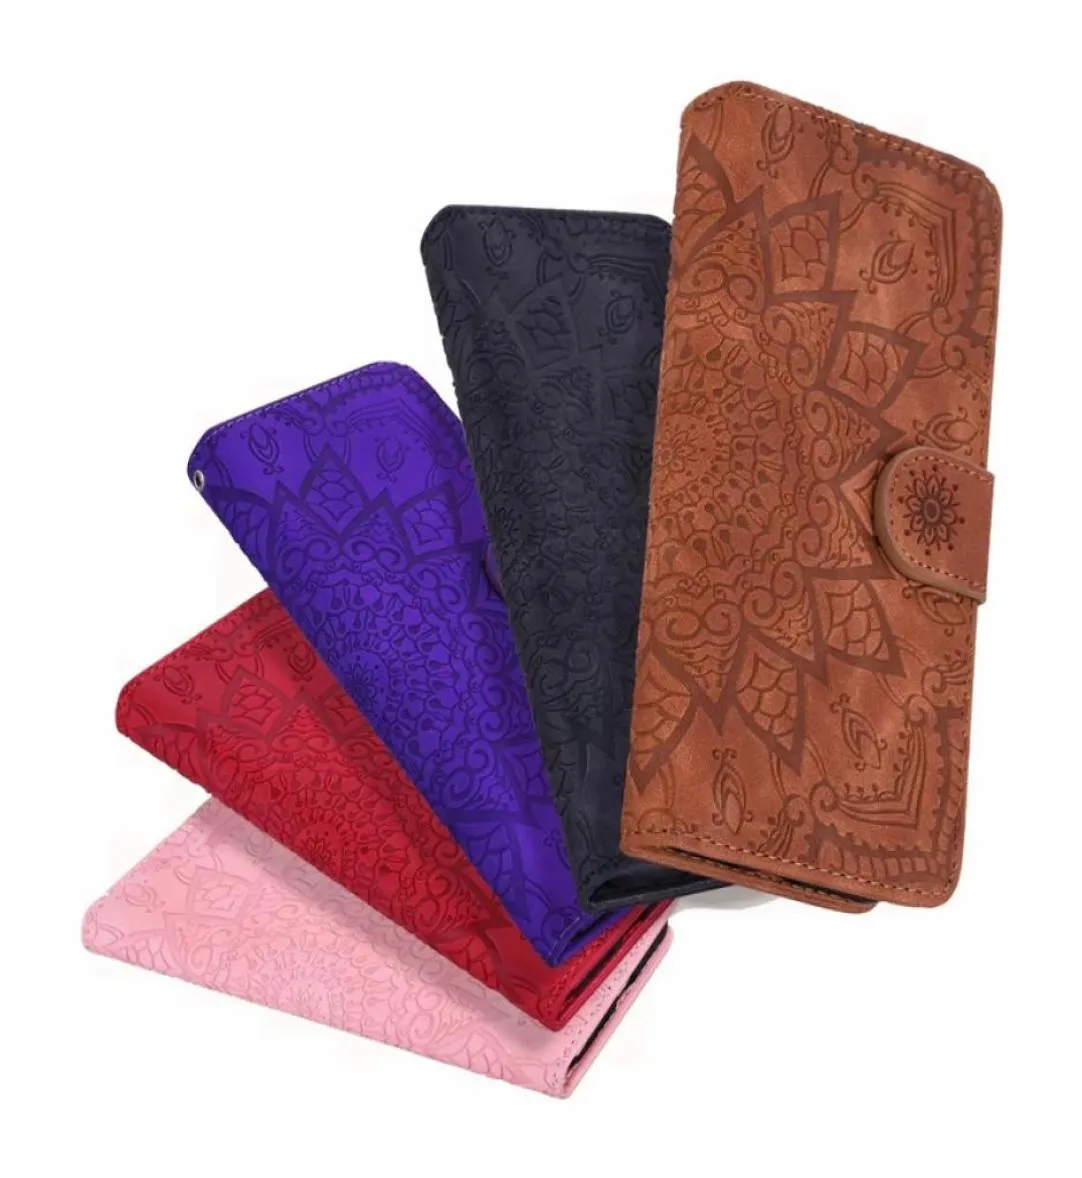 Imprint Henna Flower Leather Wallet Cases For Samsung Galaxy S21 Ultra Plus A42 5G A52 A72 A12 S20 FE M51 Fashion Creidt ID Card S1601926